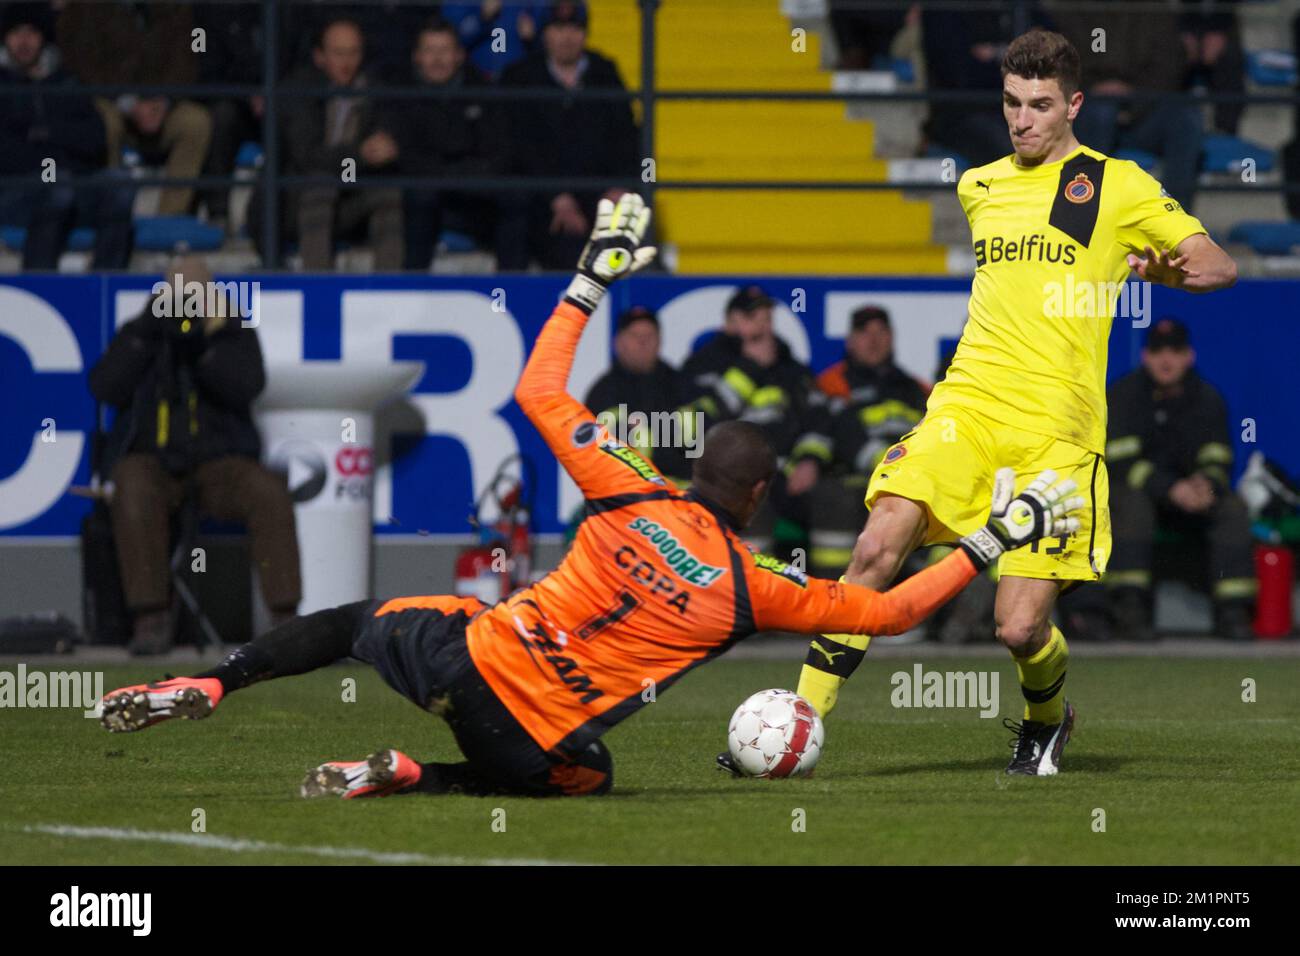 Club Brugge's Thomas Meunier and Lokeren's goalkeeper Barry Boubacar Copa fight for the ball during the Jupiler Pro League match of Play-Off 1, between Sporting Lokeren and Club Brugge in Lokeren Stock Photo